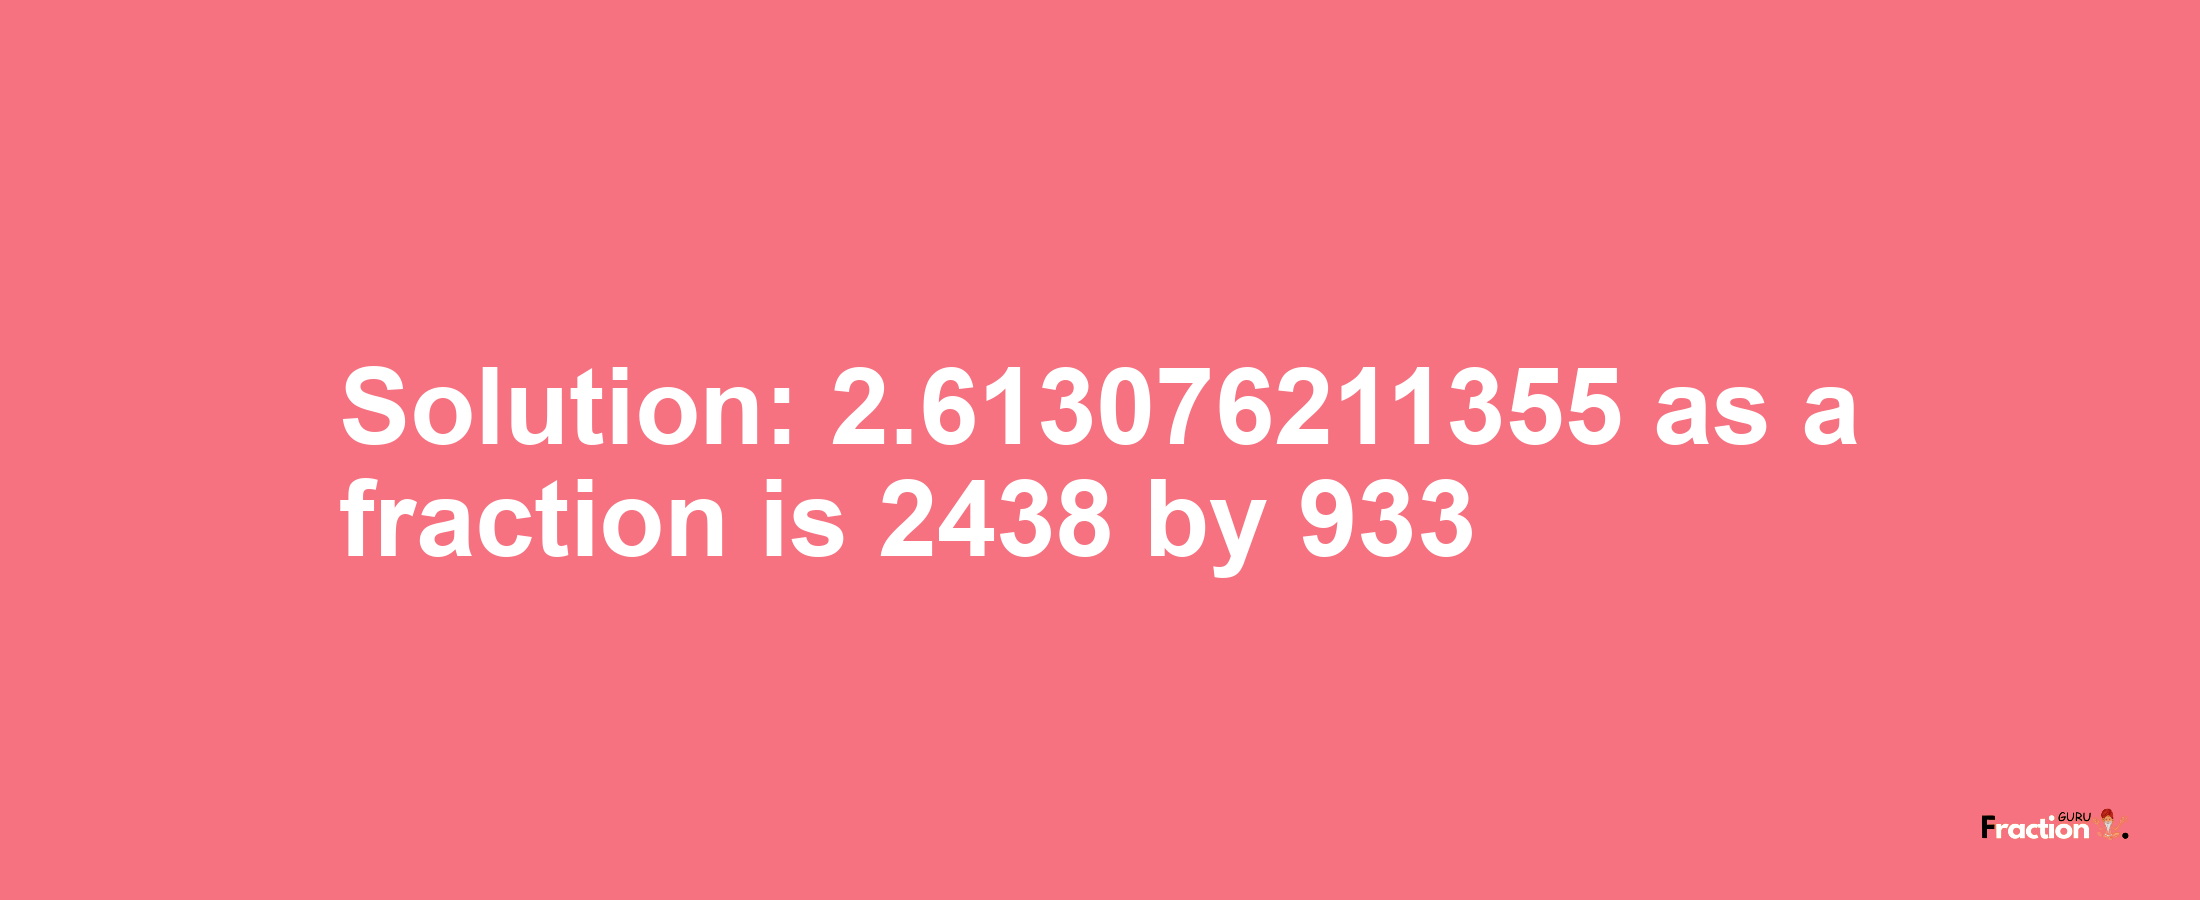 Solution:2.613076211355 as a fraction is 2438/933